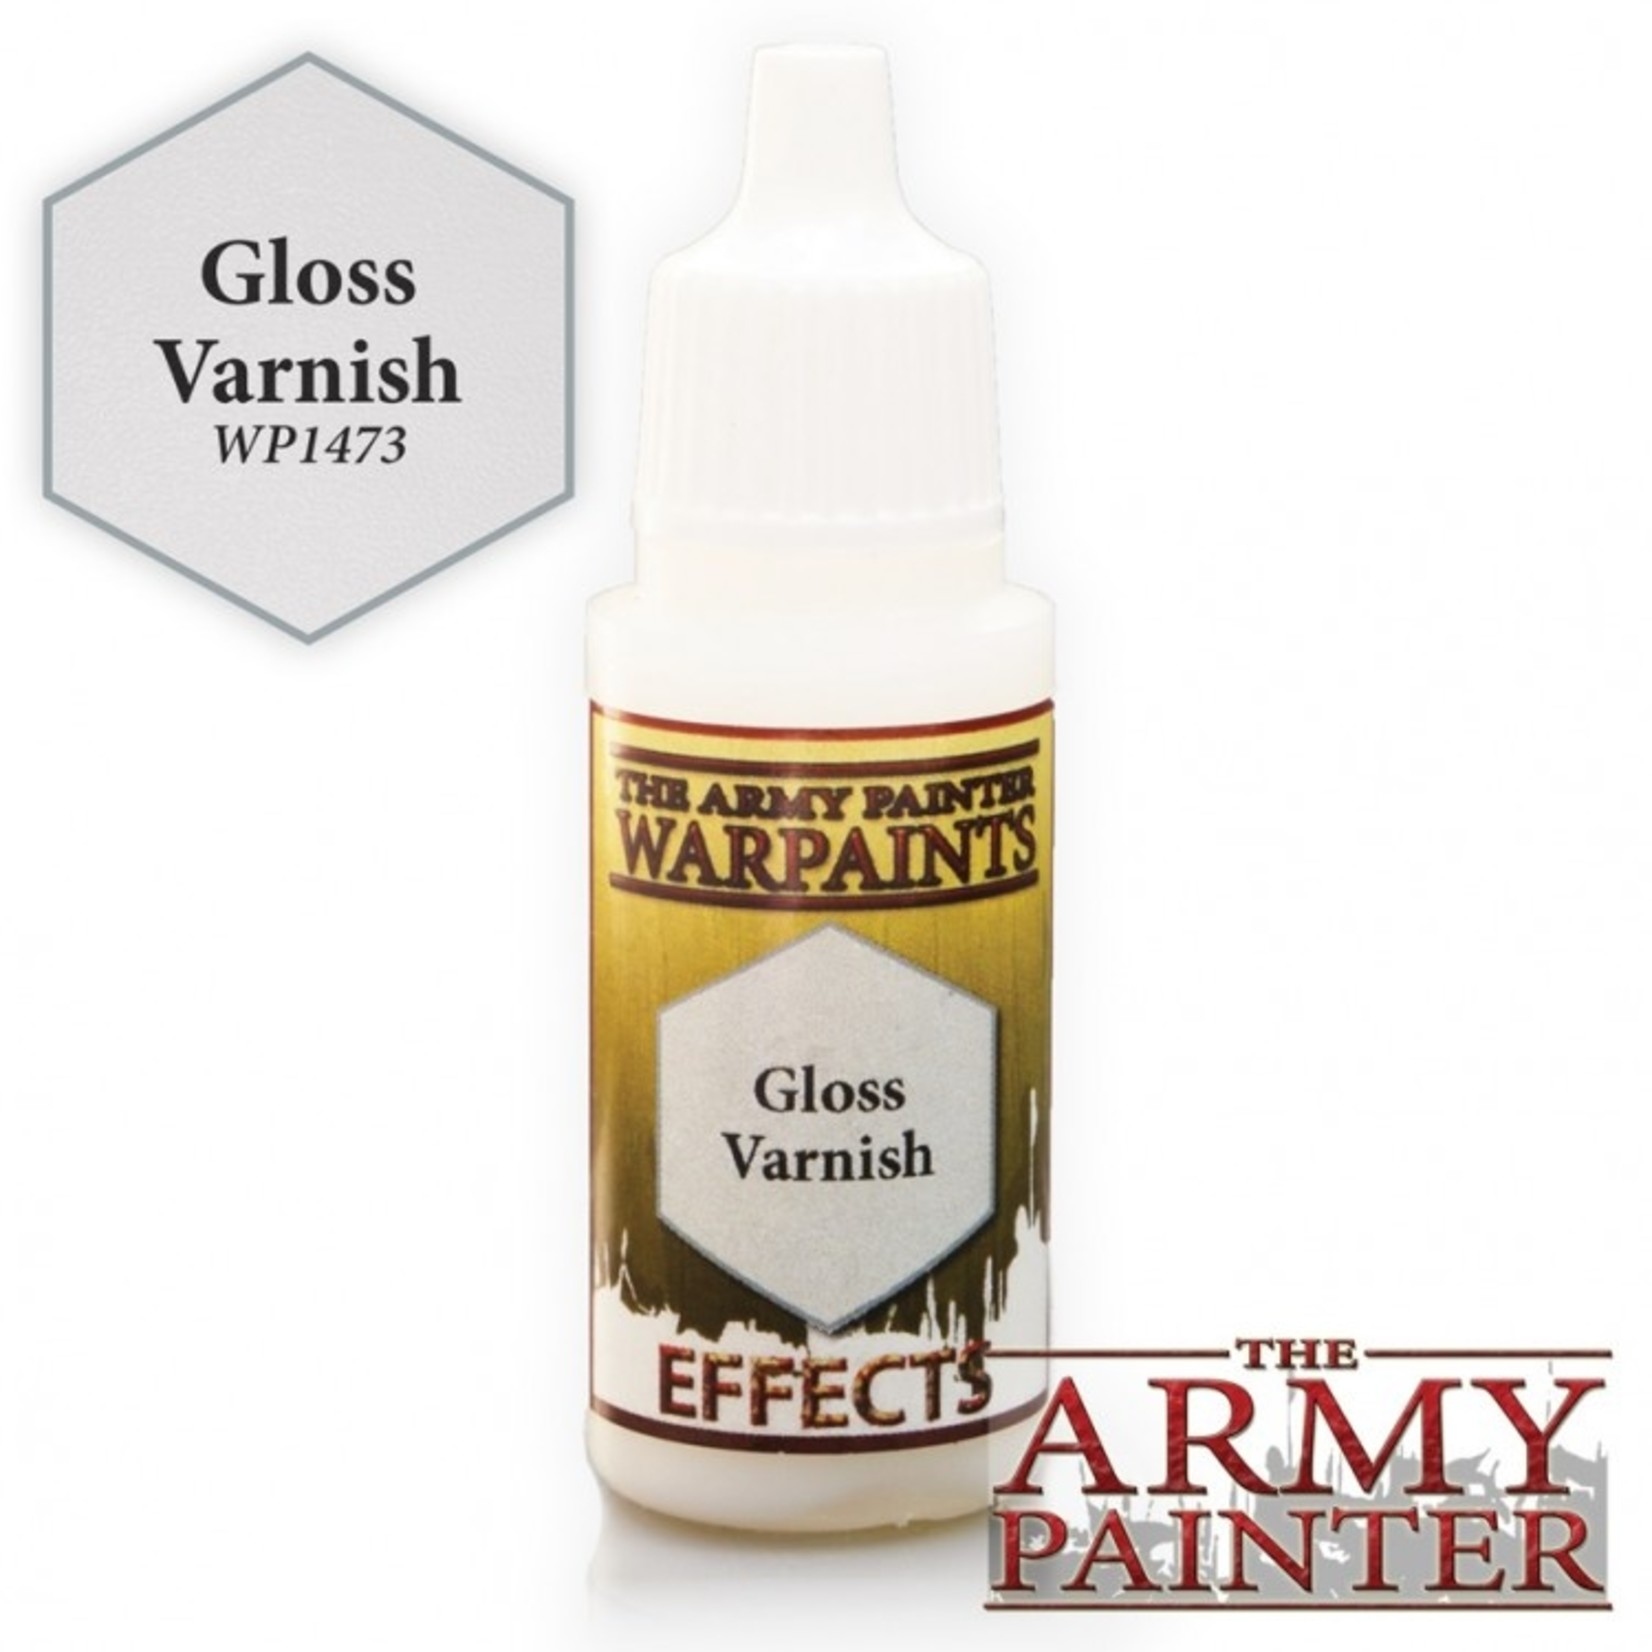 The Army Painter The Army Painter Gloss Varnish 18ml